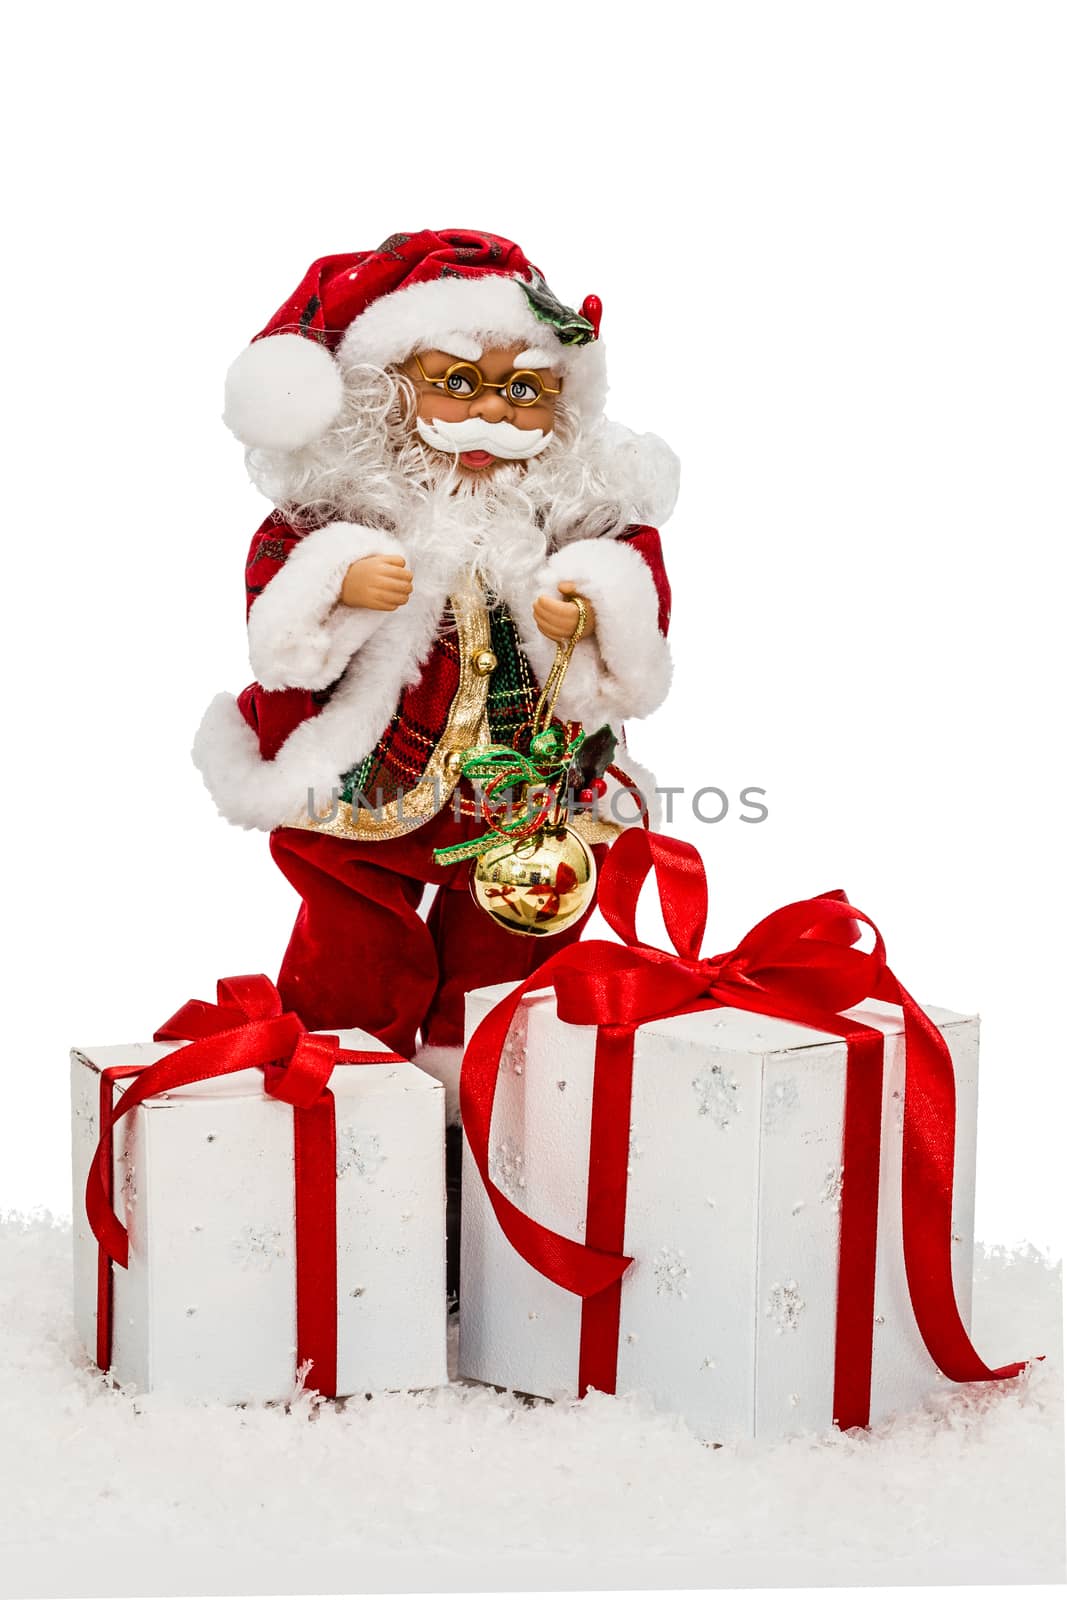 Santa Claus on snow with gift boxes - toy, isolated on white background
